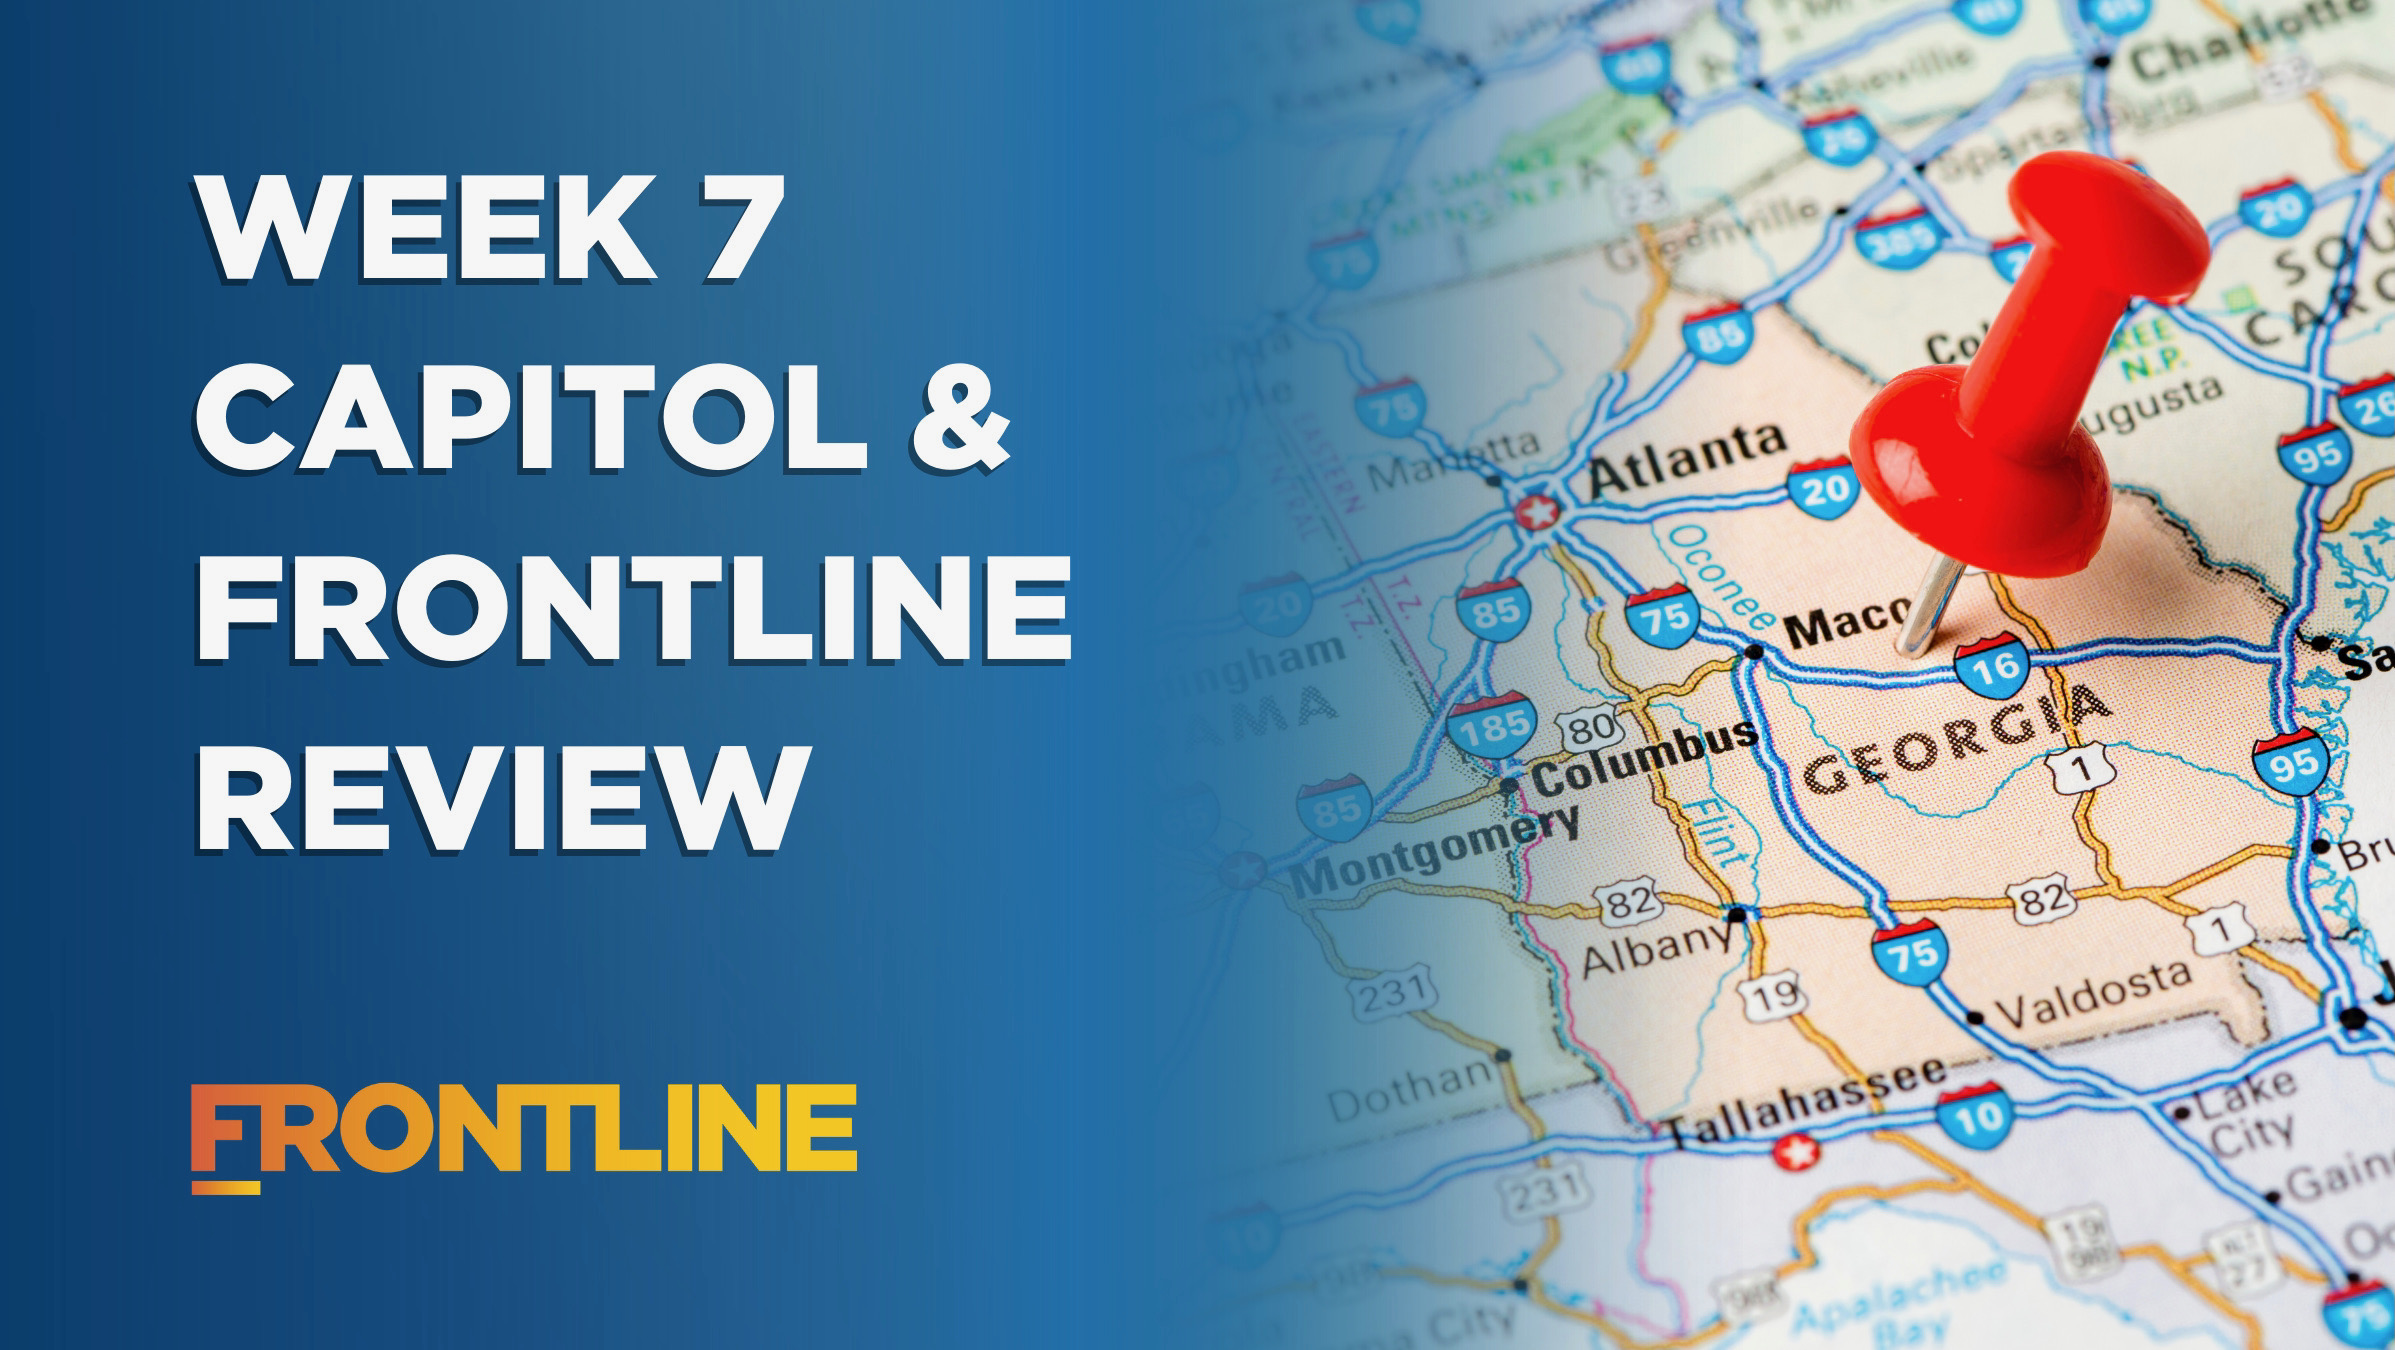 Capitol and Frontline Review – Week 7